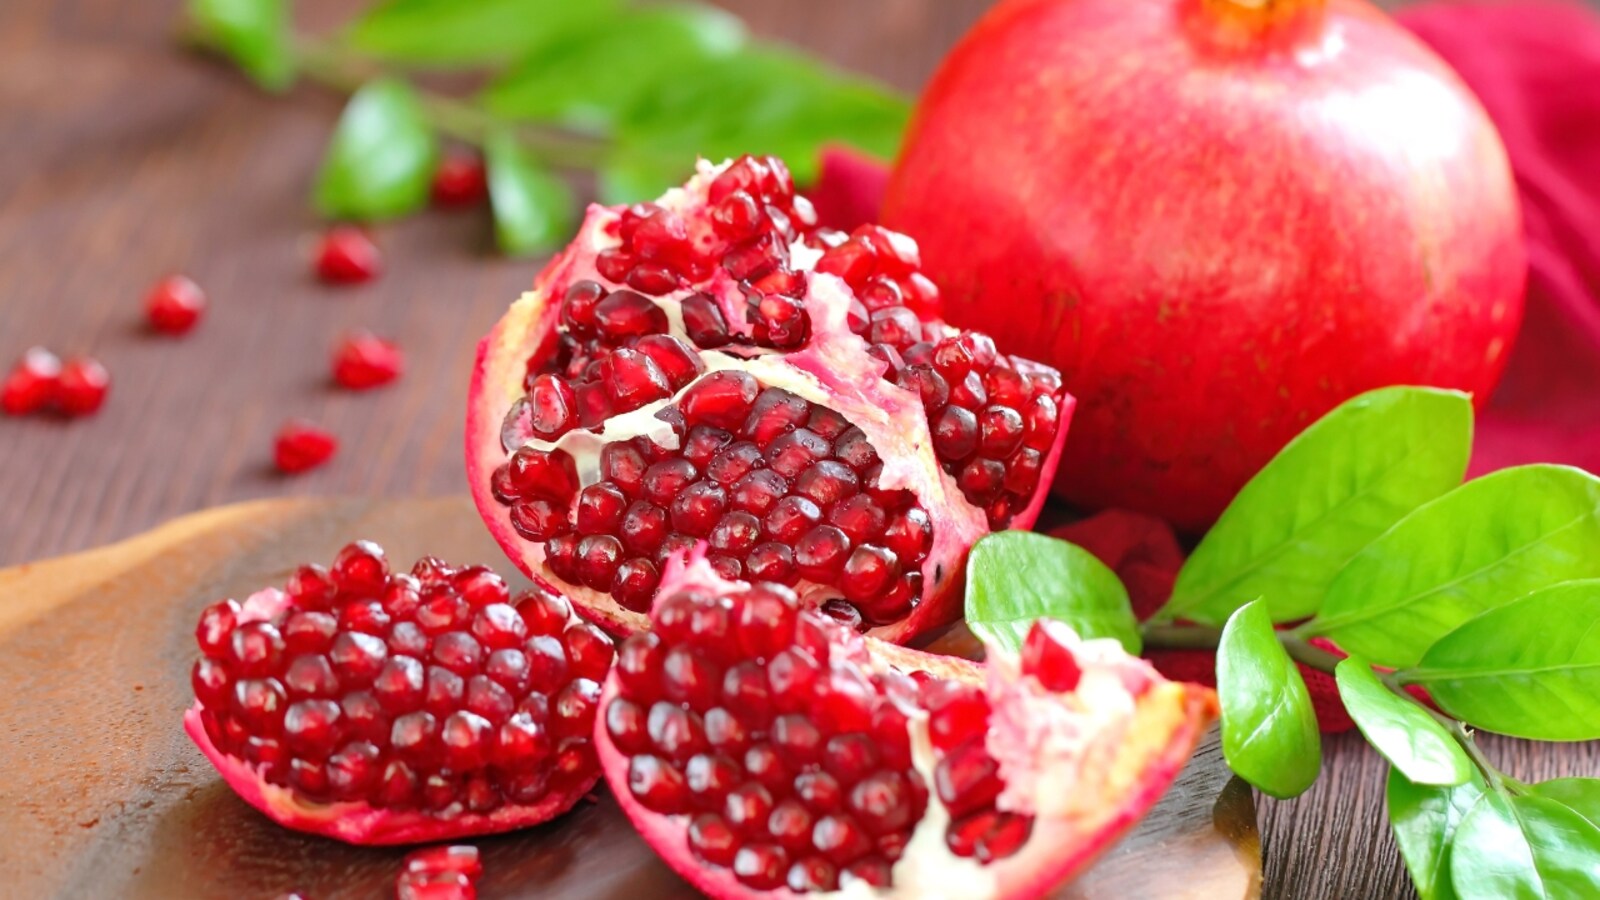 How to control diabetes, blood sugar level: Add pomegranate to your diet,  but in moderation